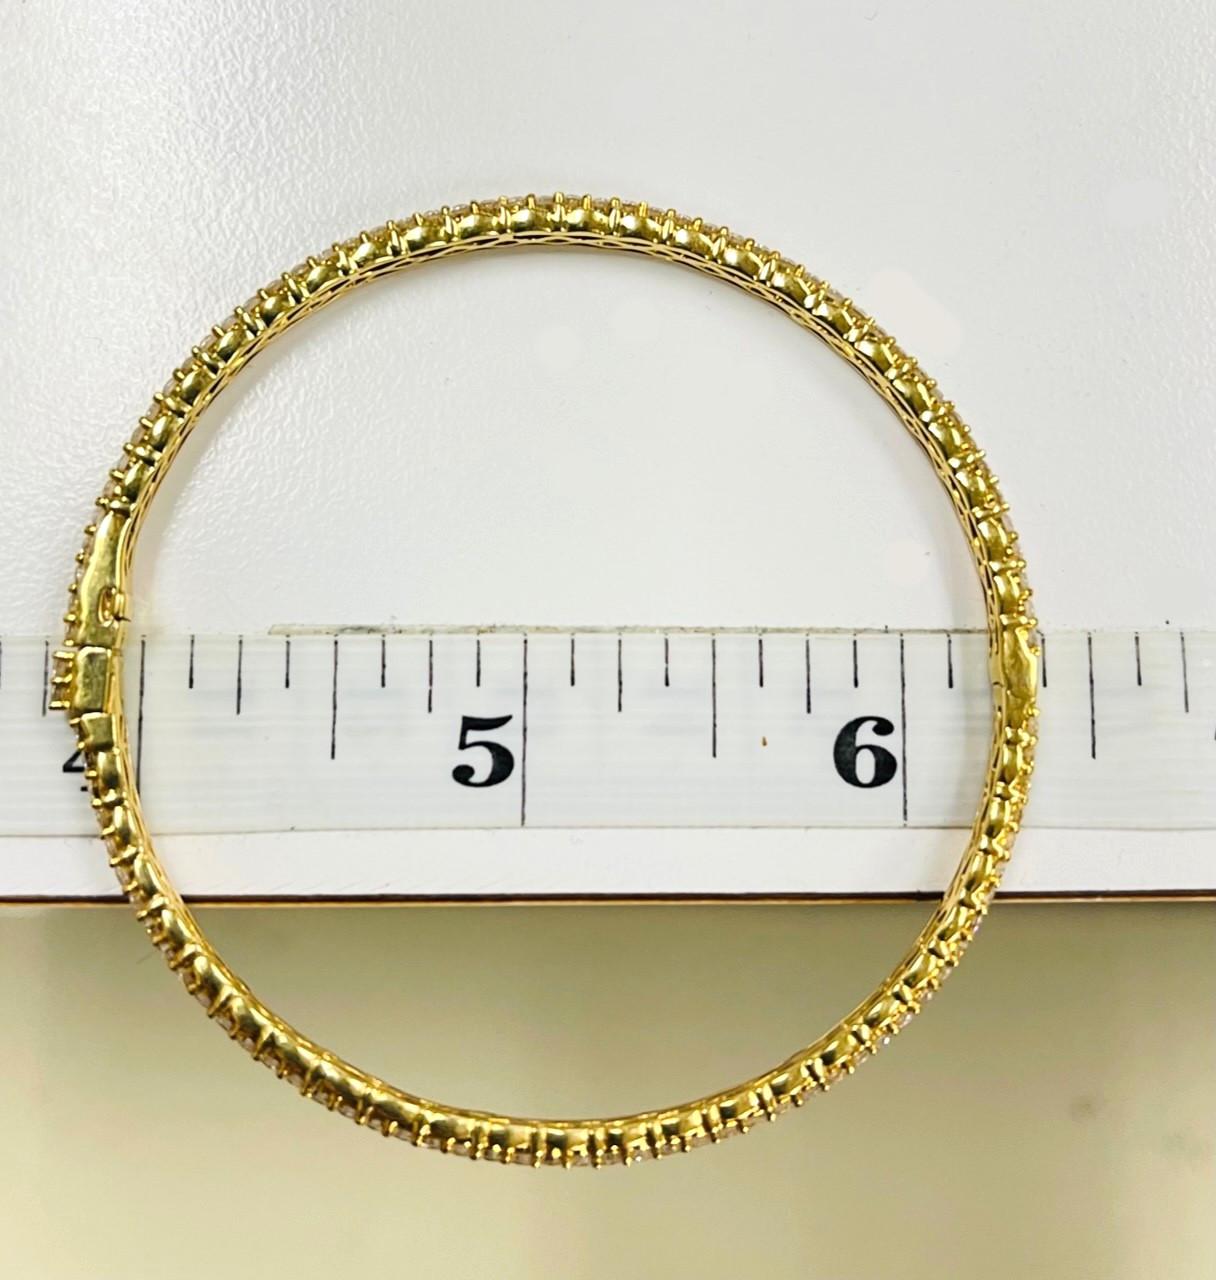 Diamond and Yellow Gold Circle Bangle Bracelet, 2.63 Carats Total In New Condition For Sale In Los Angeles, CA